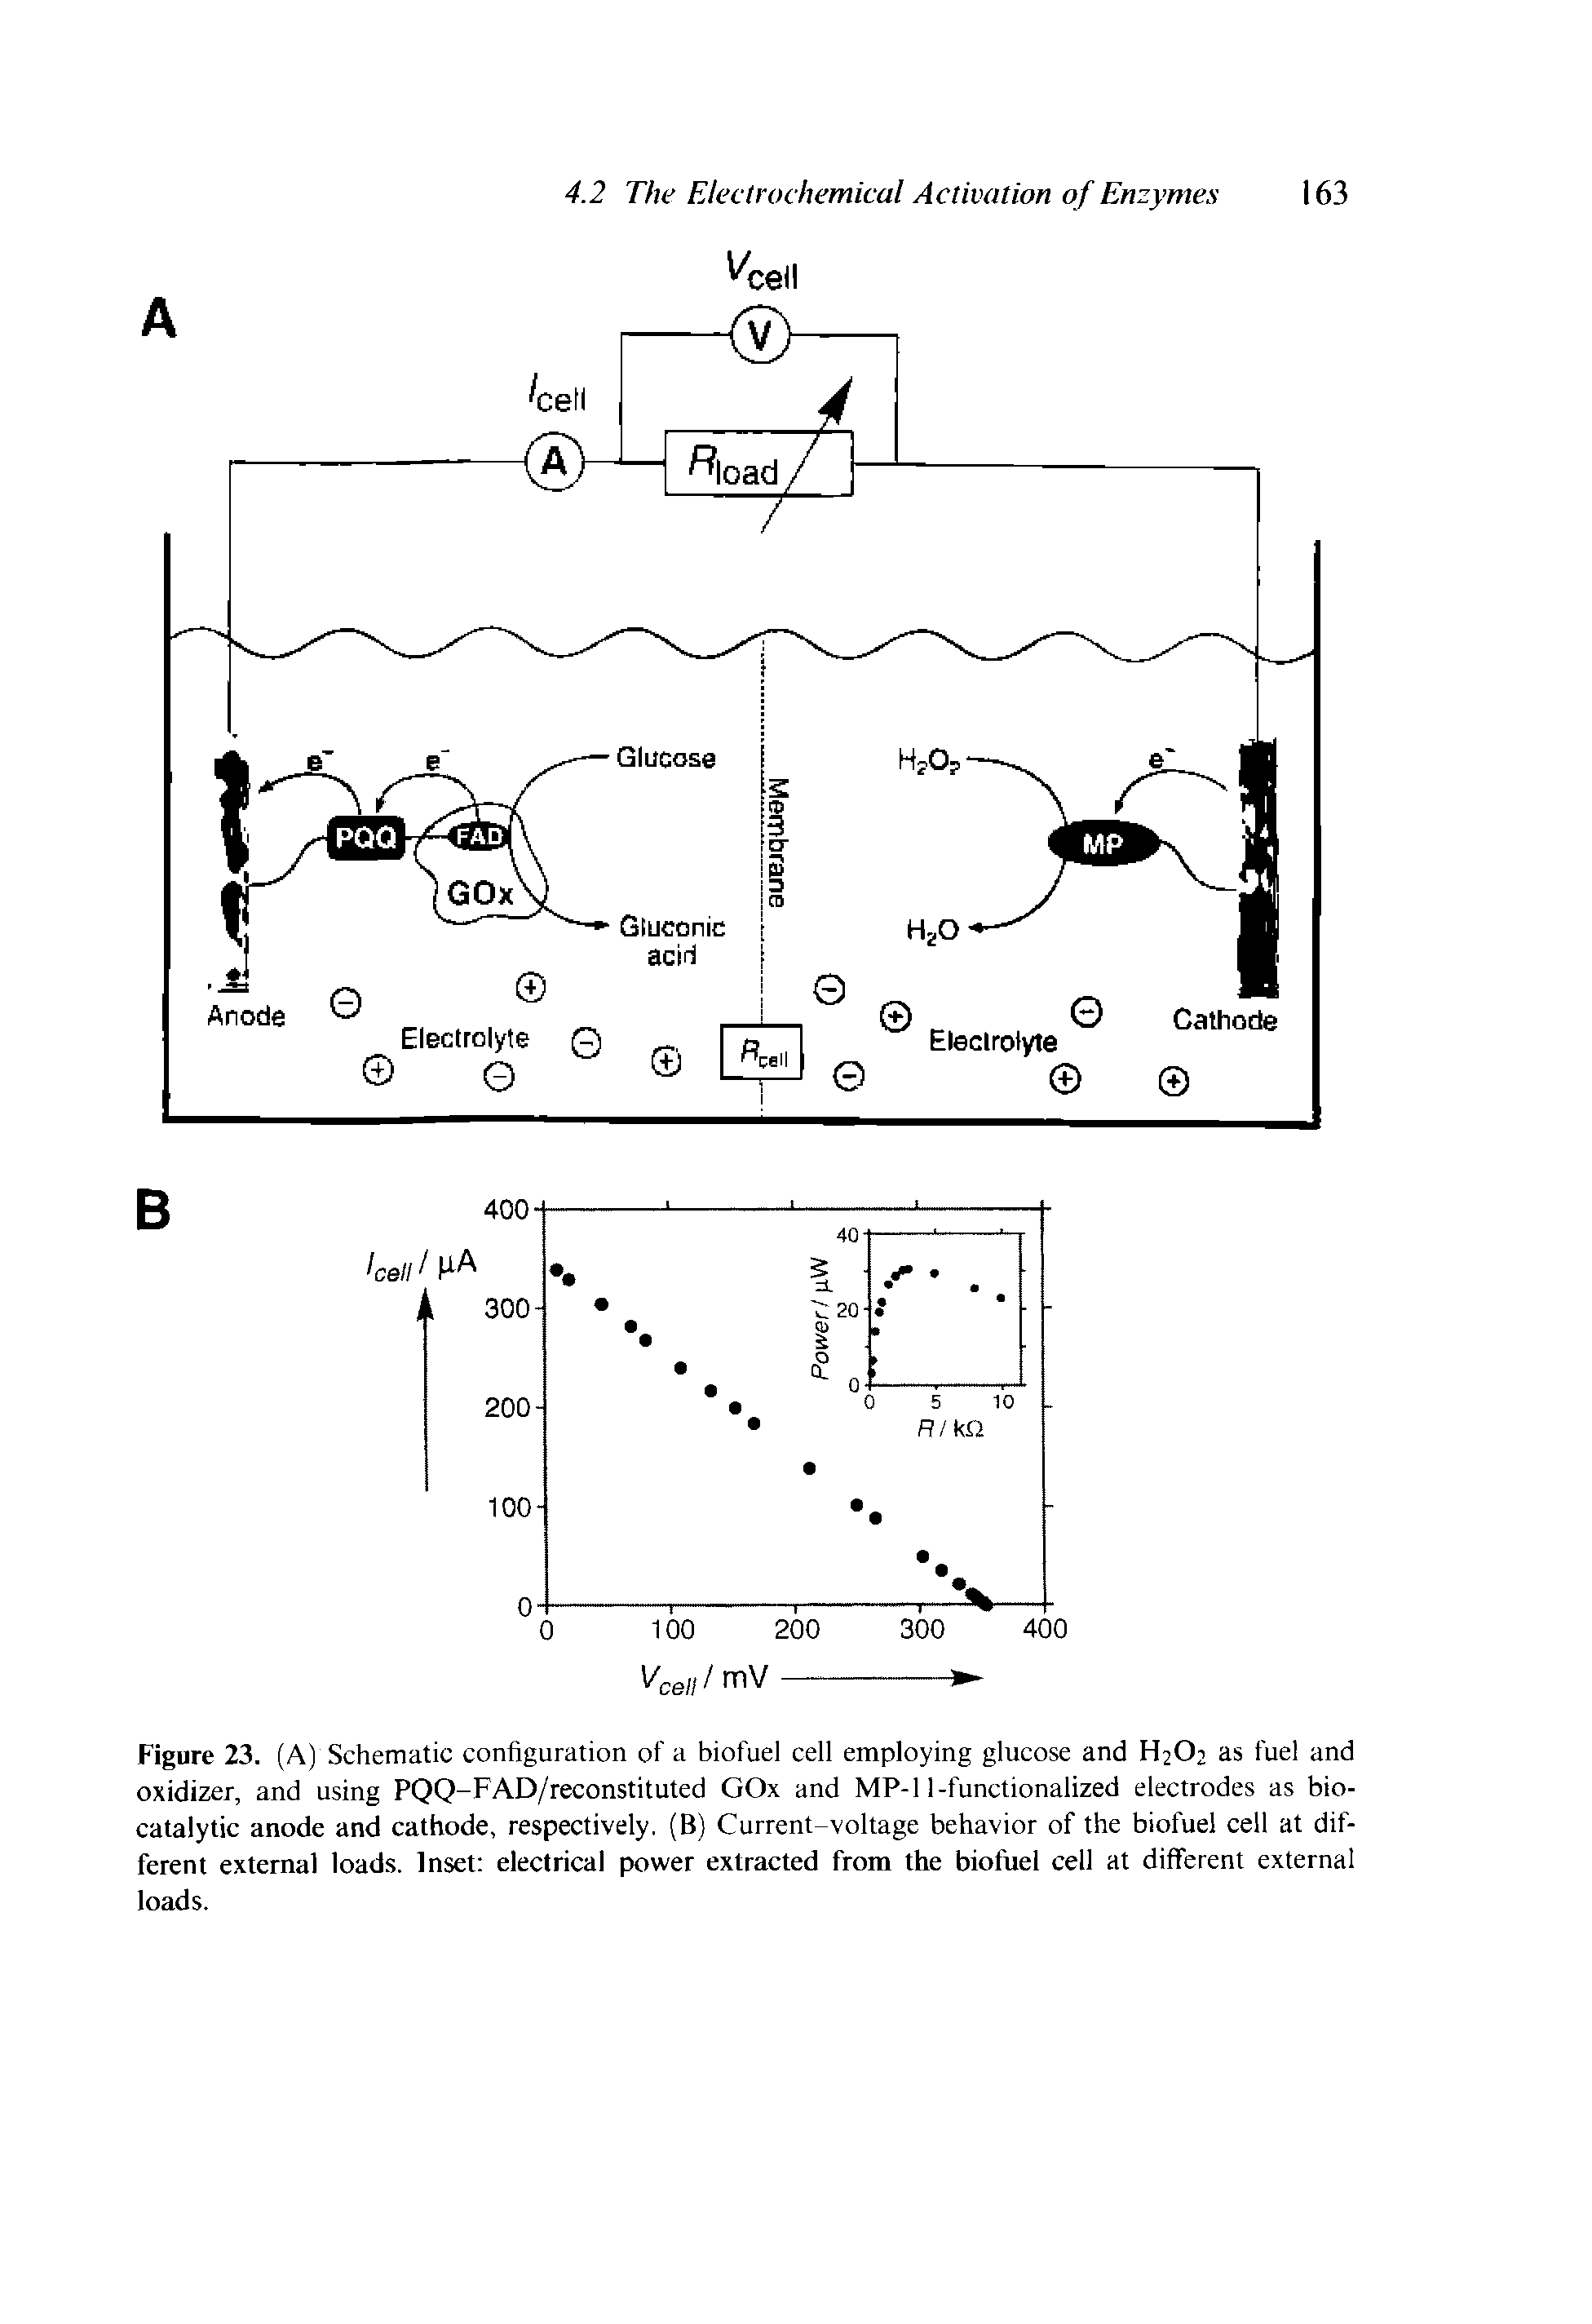 Figure 23. (A) Schematic configuration of a biofuel cell employing glucose and H2O2 as fuel and oxidizer, and using PQQ-FAD/reconstituted GOx and MP-11-functionalized electrodes as bio-catalytic anode and cathode, respectively. (B) Current-voltage behavior of the biofuel cell at different external loads. Inset electrical power extracted from the biofuel cell at different external loads.